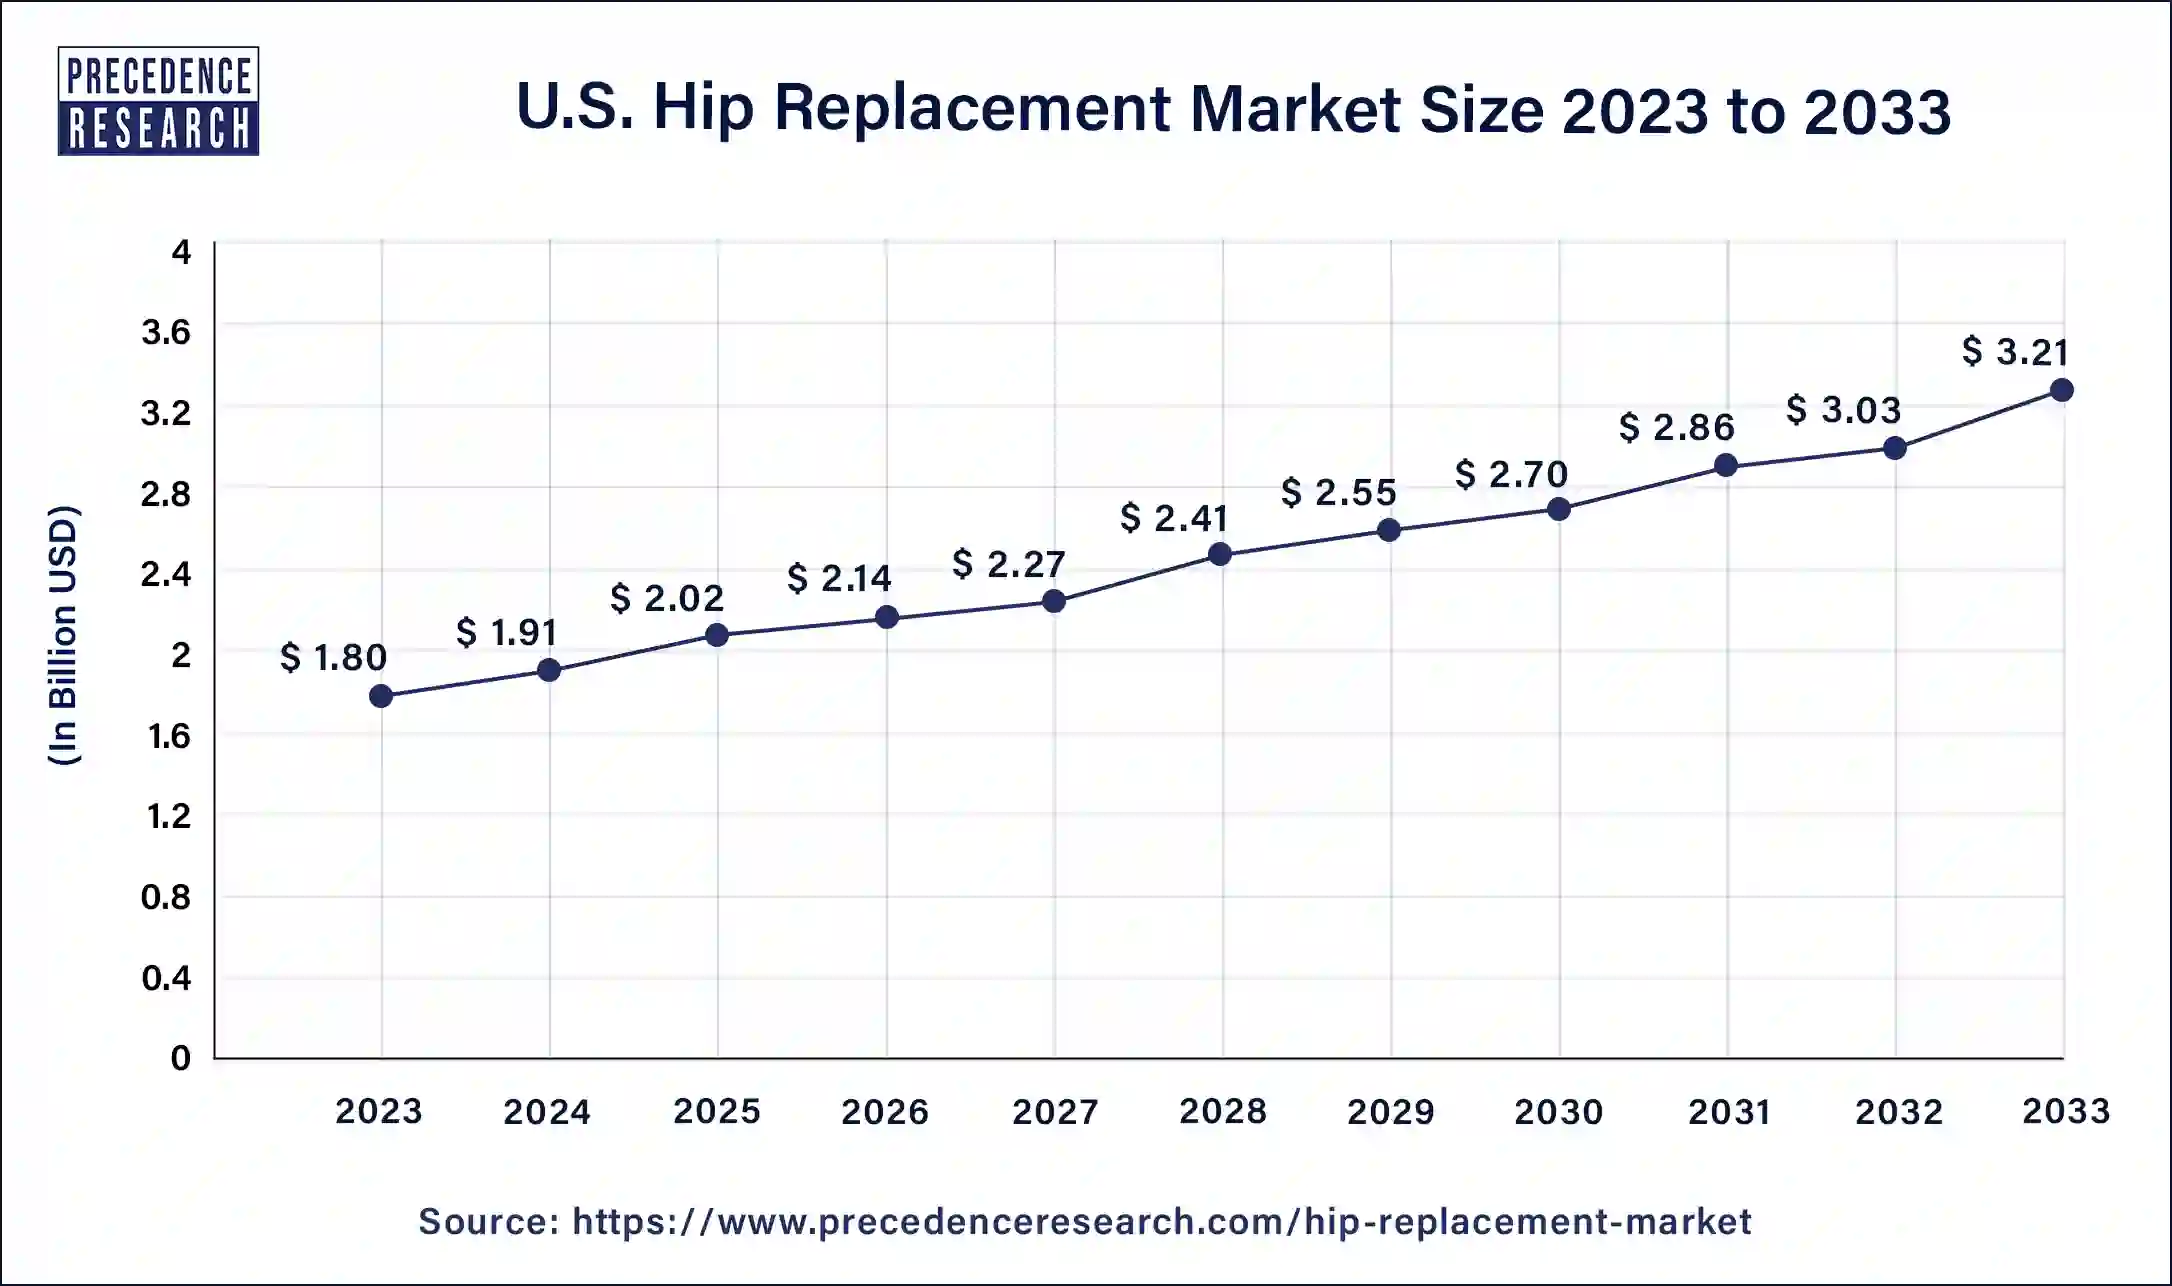 U.S. Hip Replacement Market Size 2024 to 2033